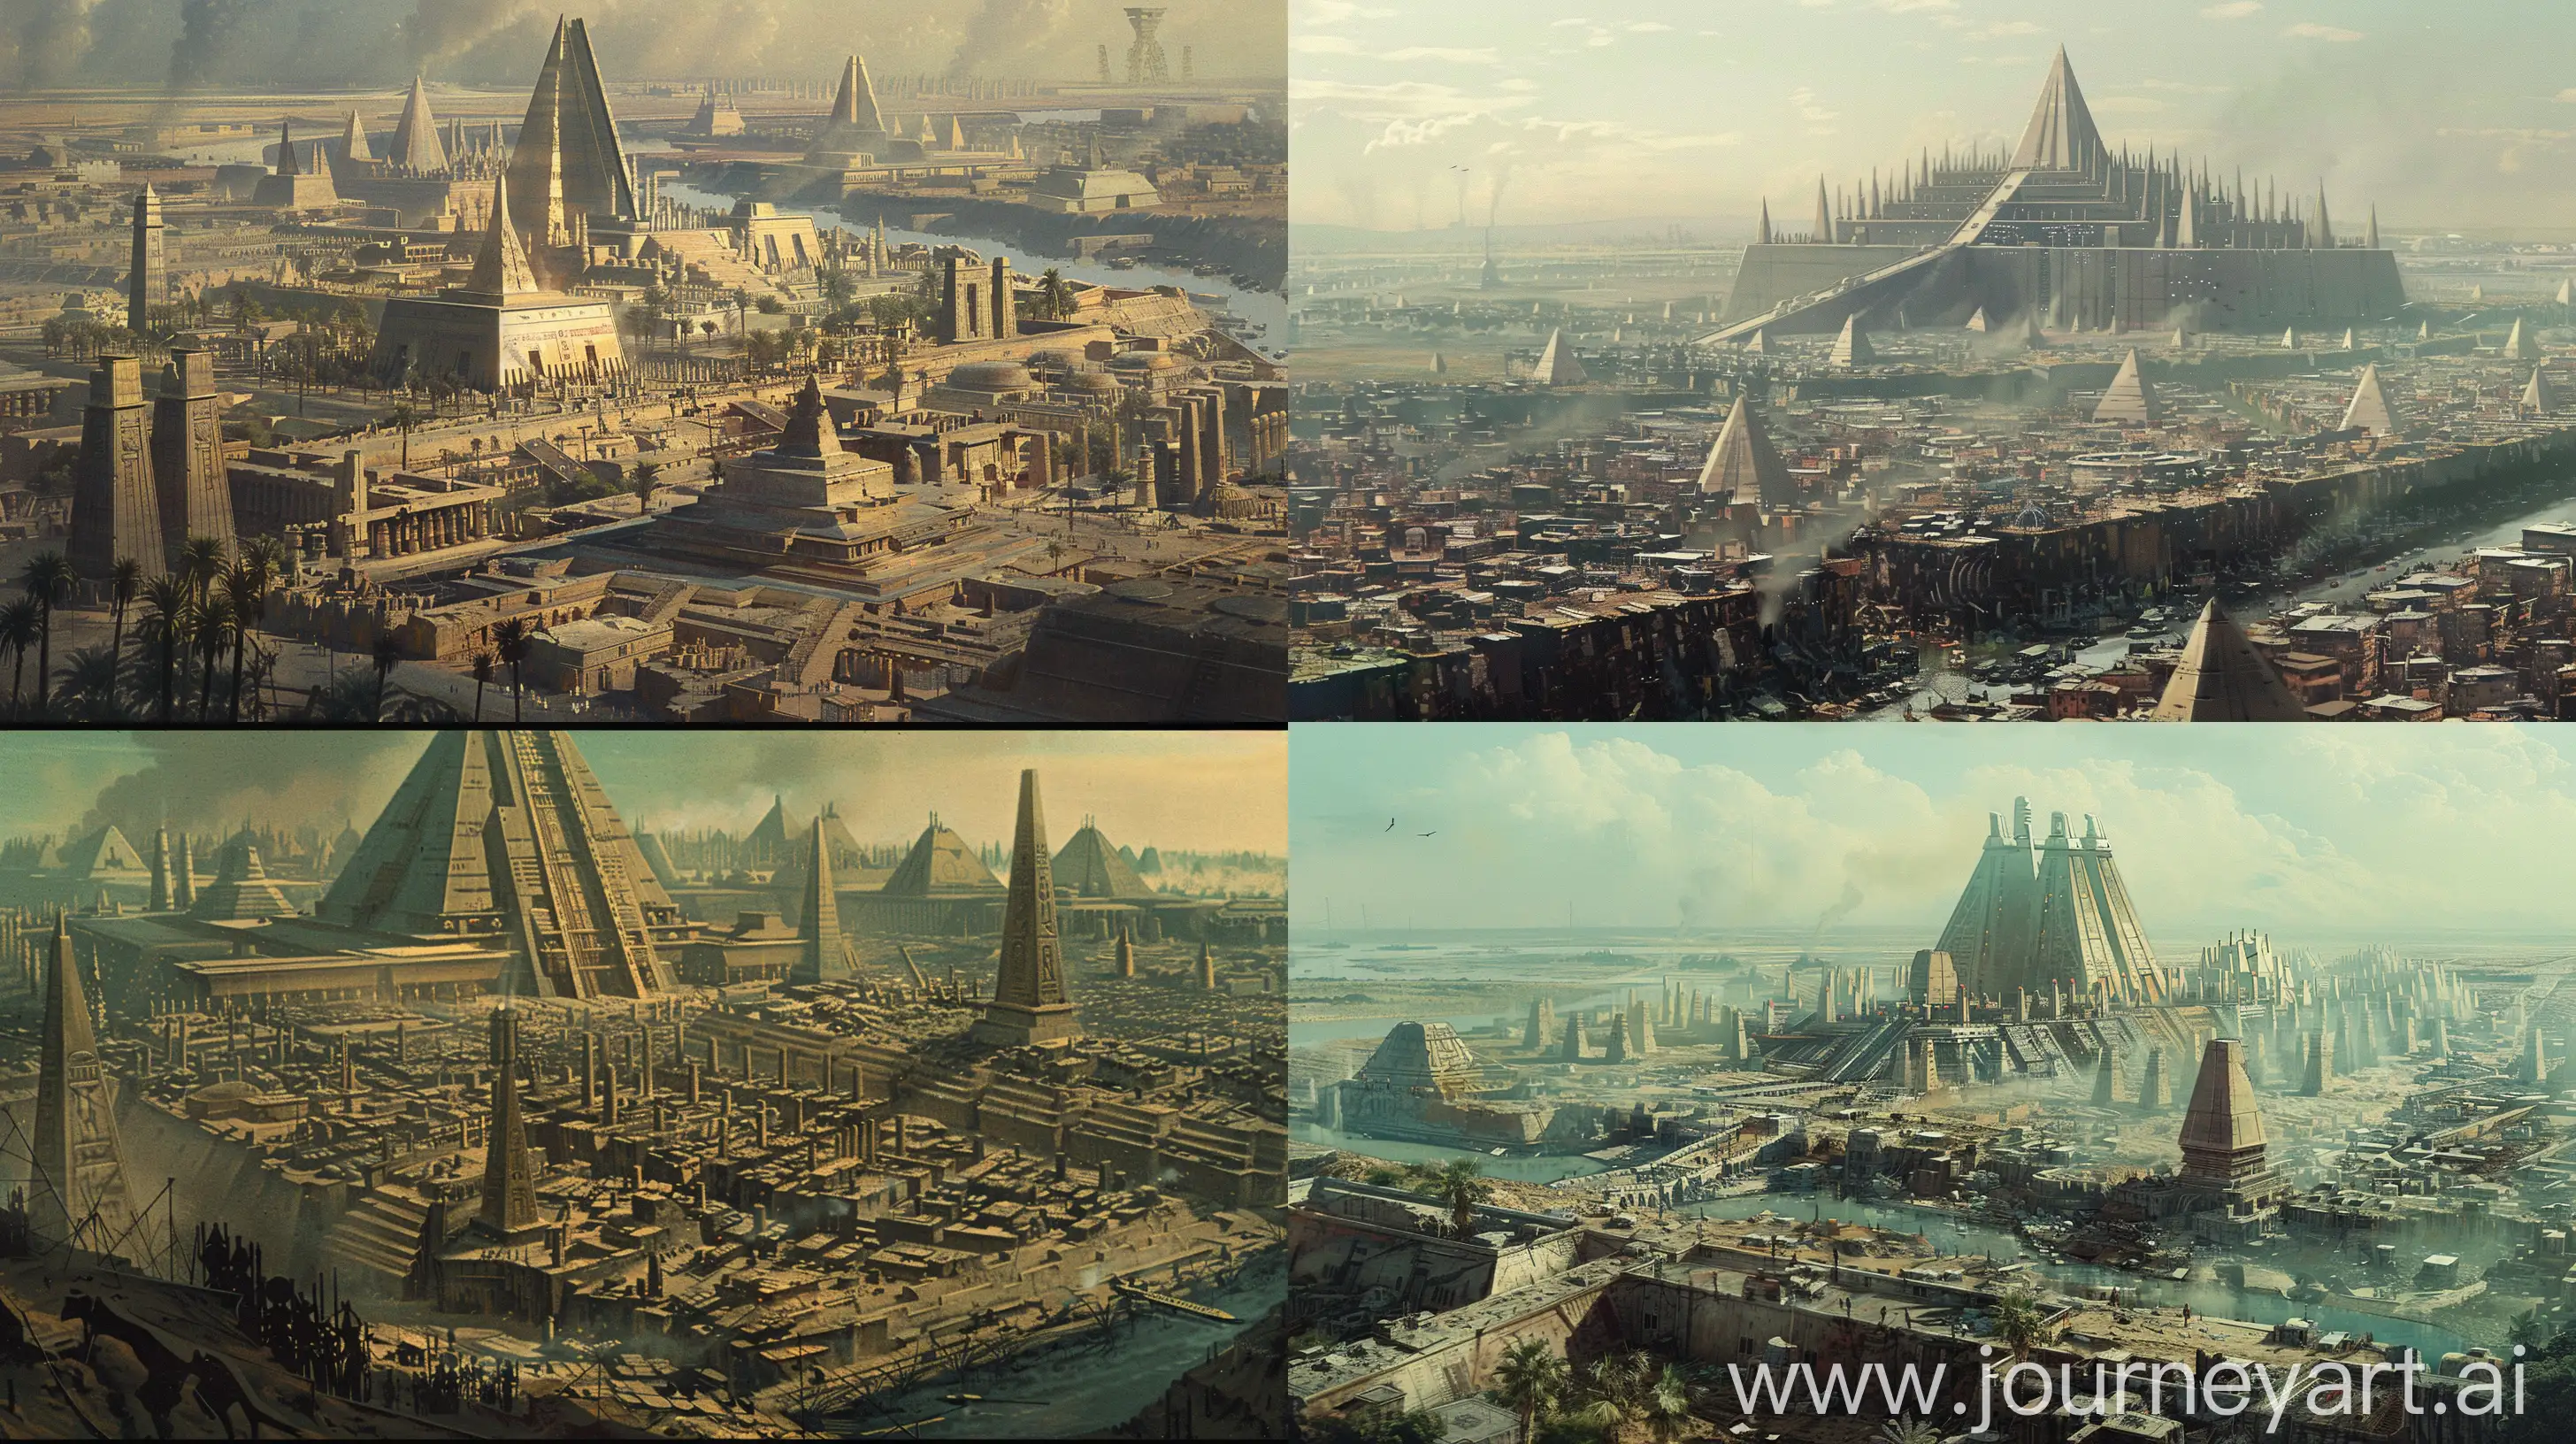 retro sci-fi concept art of far away view of a city of majestic pylon and ziggurat architecture surrounded by squalid slums. Ralph McQuarrie style. in color. --ar 16:9